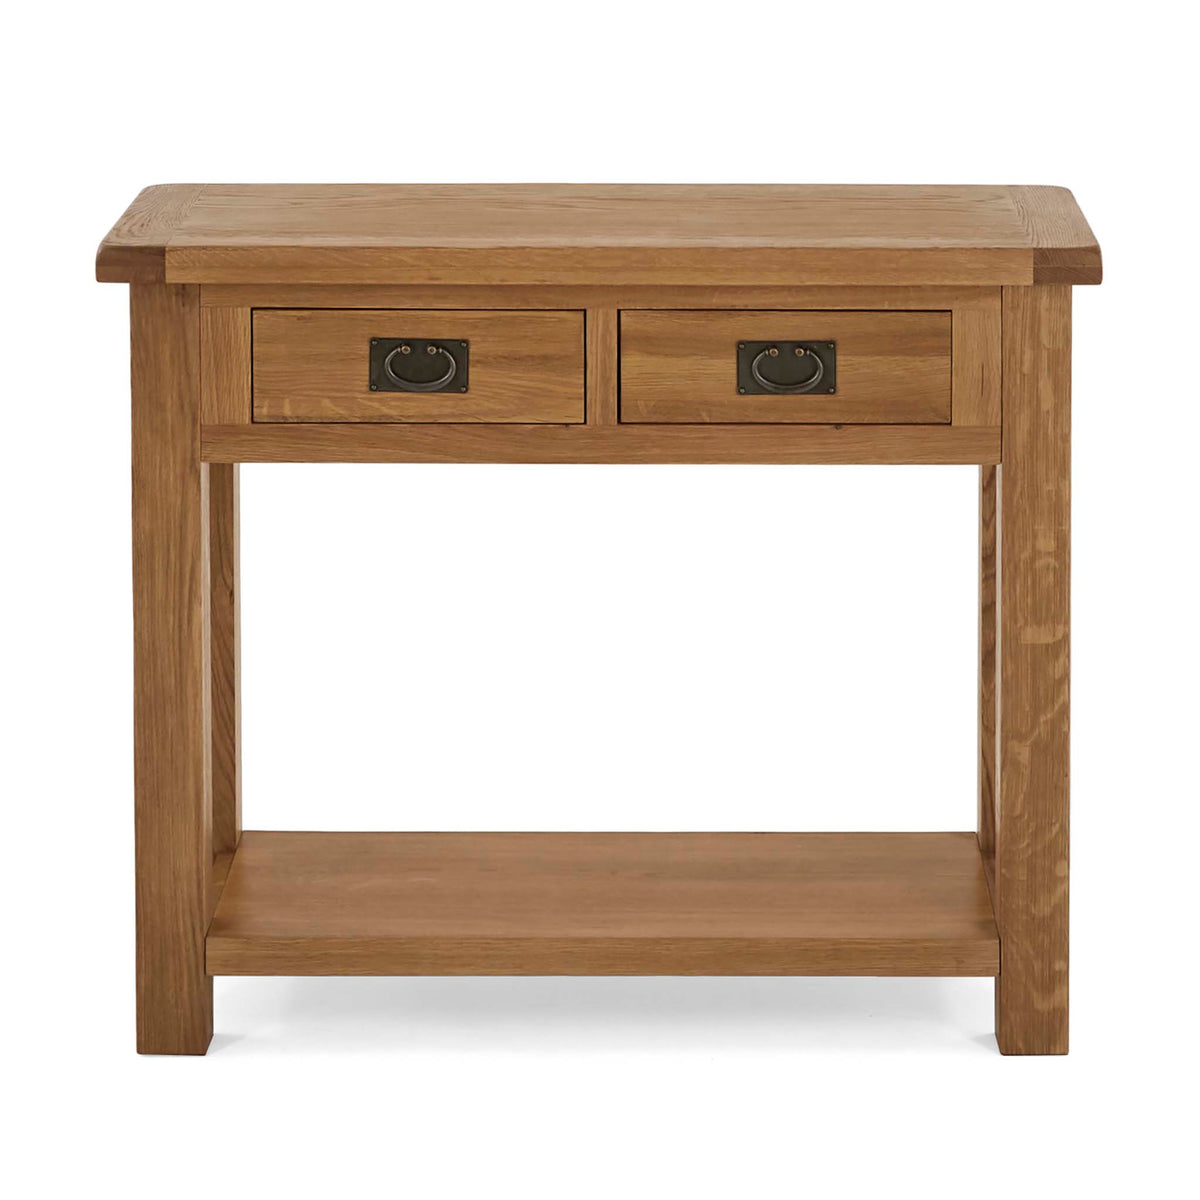 Zelah Oak Console Table - Front view with top showing